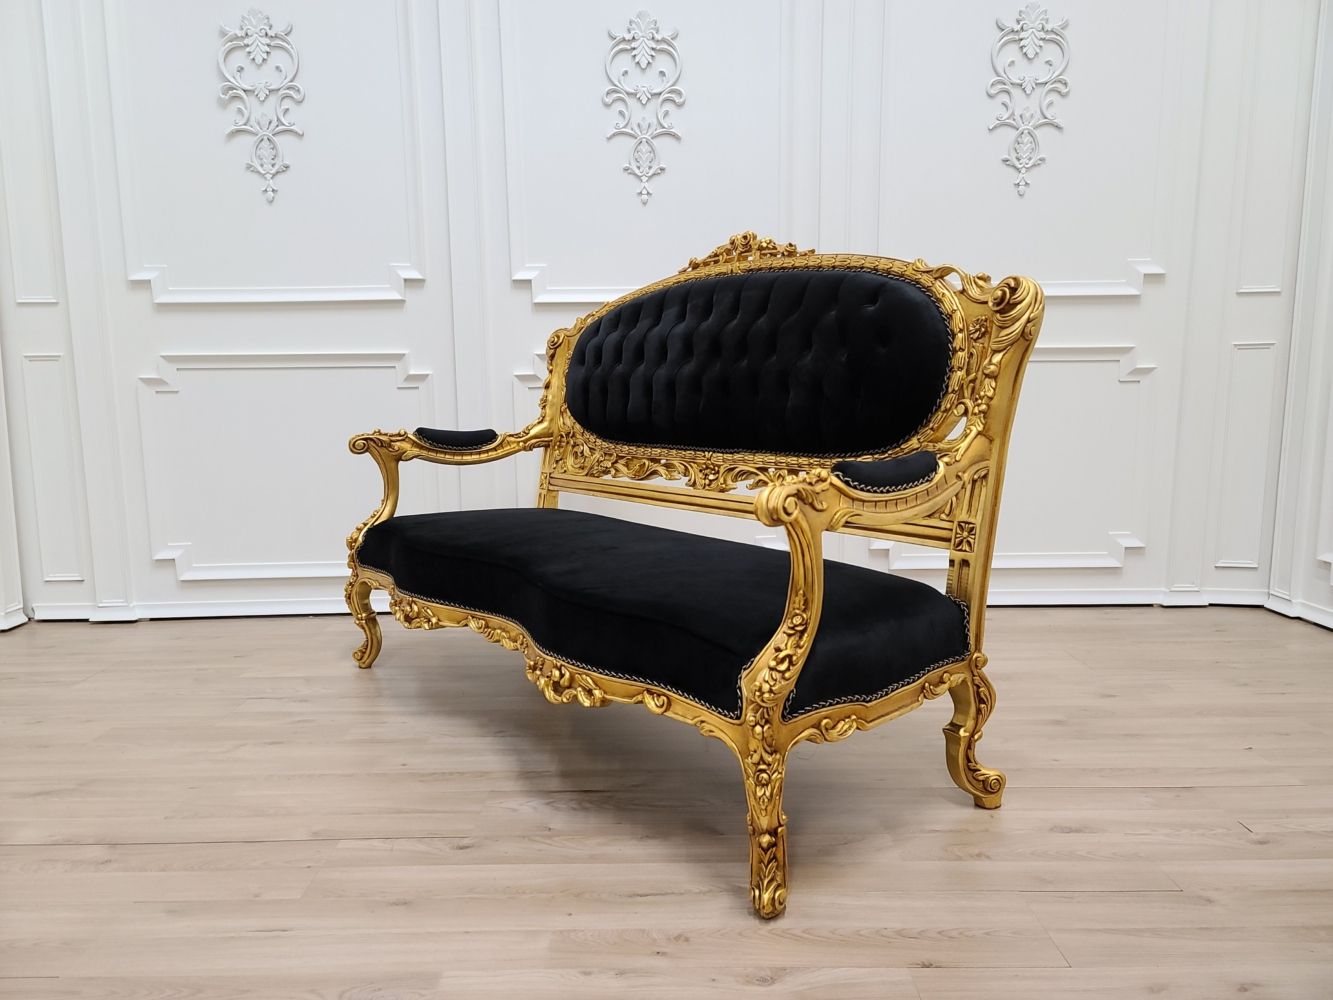 Victorian Sofa/ Antique Gold Leaf Finish Frame/ Tufted Throughout 4Pc French Seamed Sectional Sofas Velvet Black (View 12 of 15)